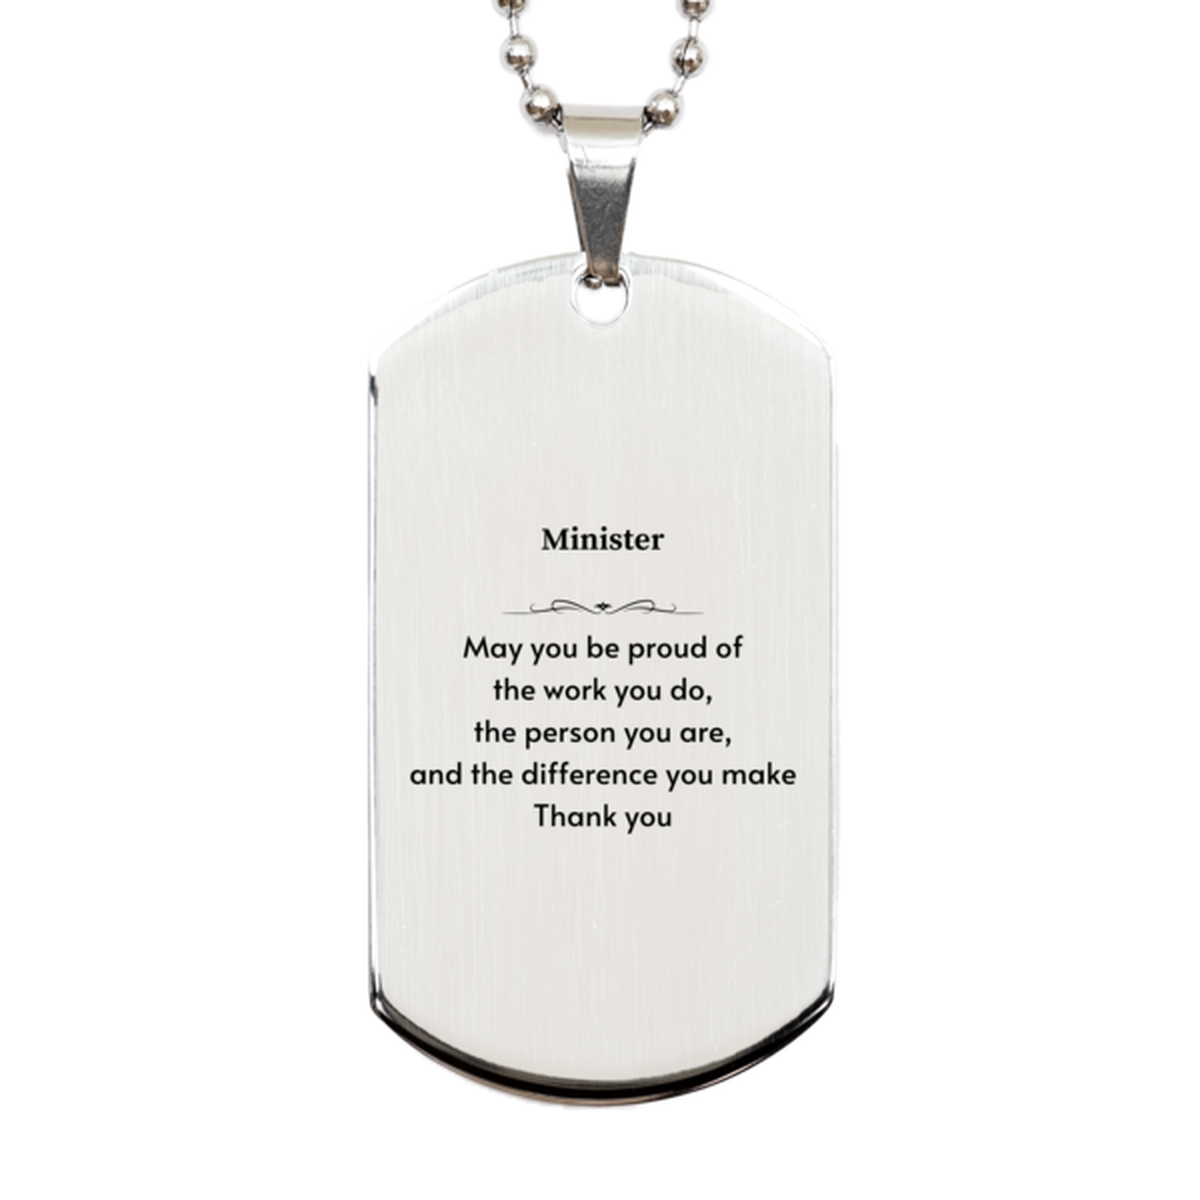 Heartwarming Silver Dog Tag Retirement Coworkers Gifts for Minister, Minister May You be proud of the work you do, the person you are Gifts for Boss Men Women Friends